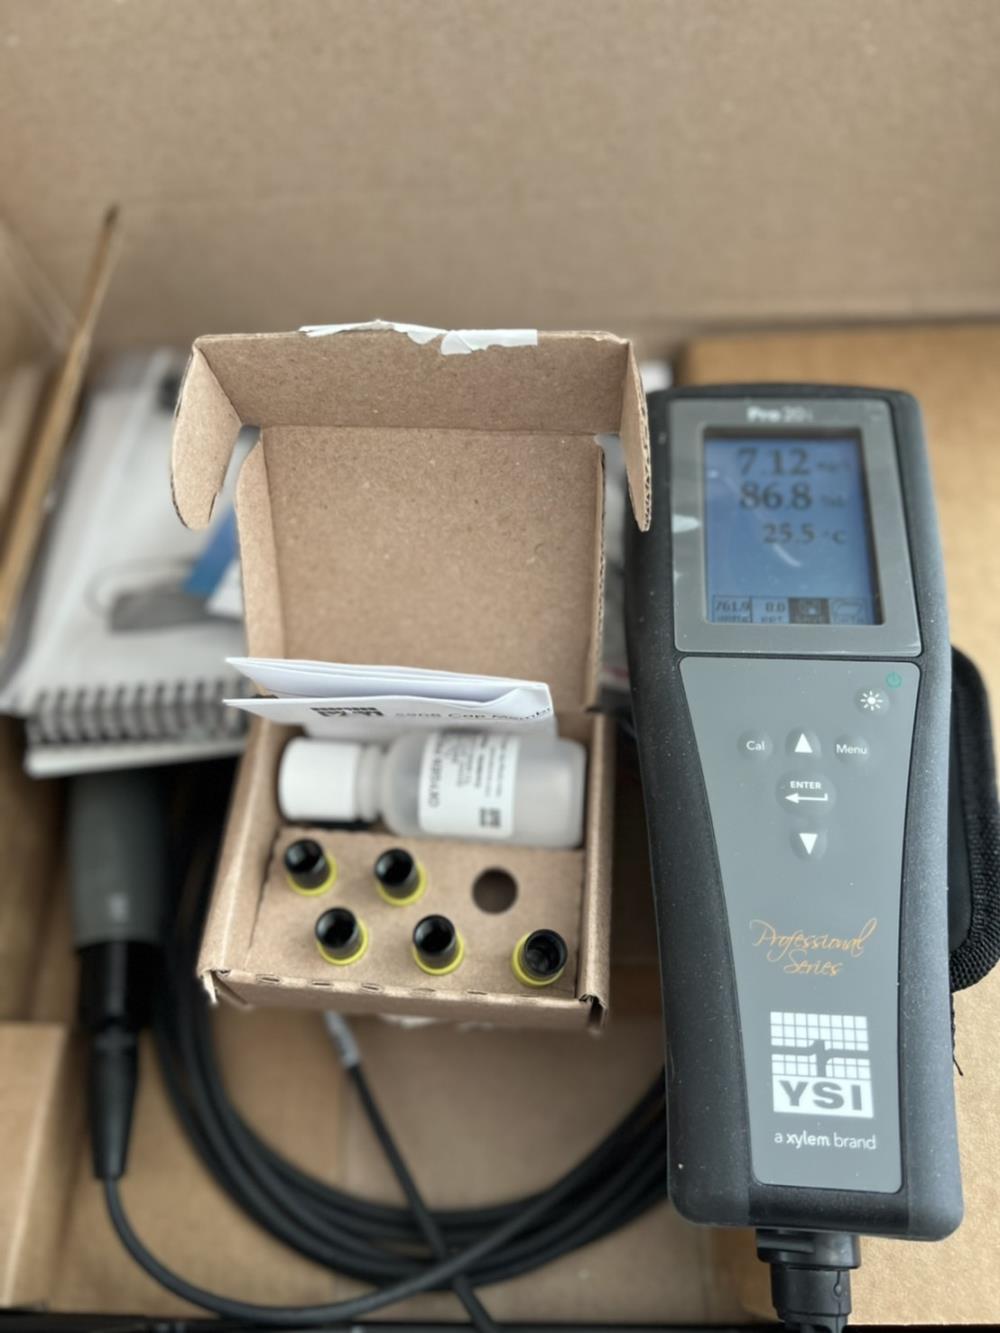 YSI PRO20i DO METER (Dissolved Oxygen Meter with integral cable)